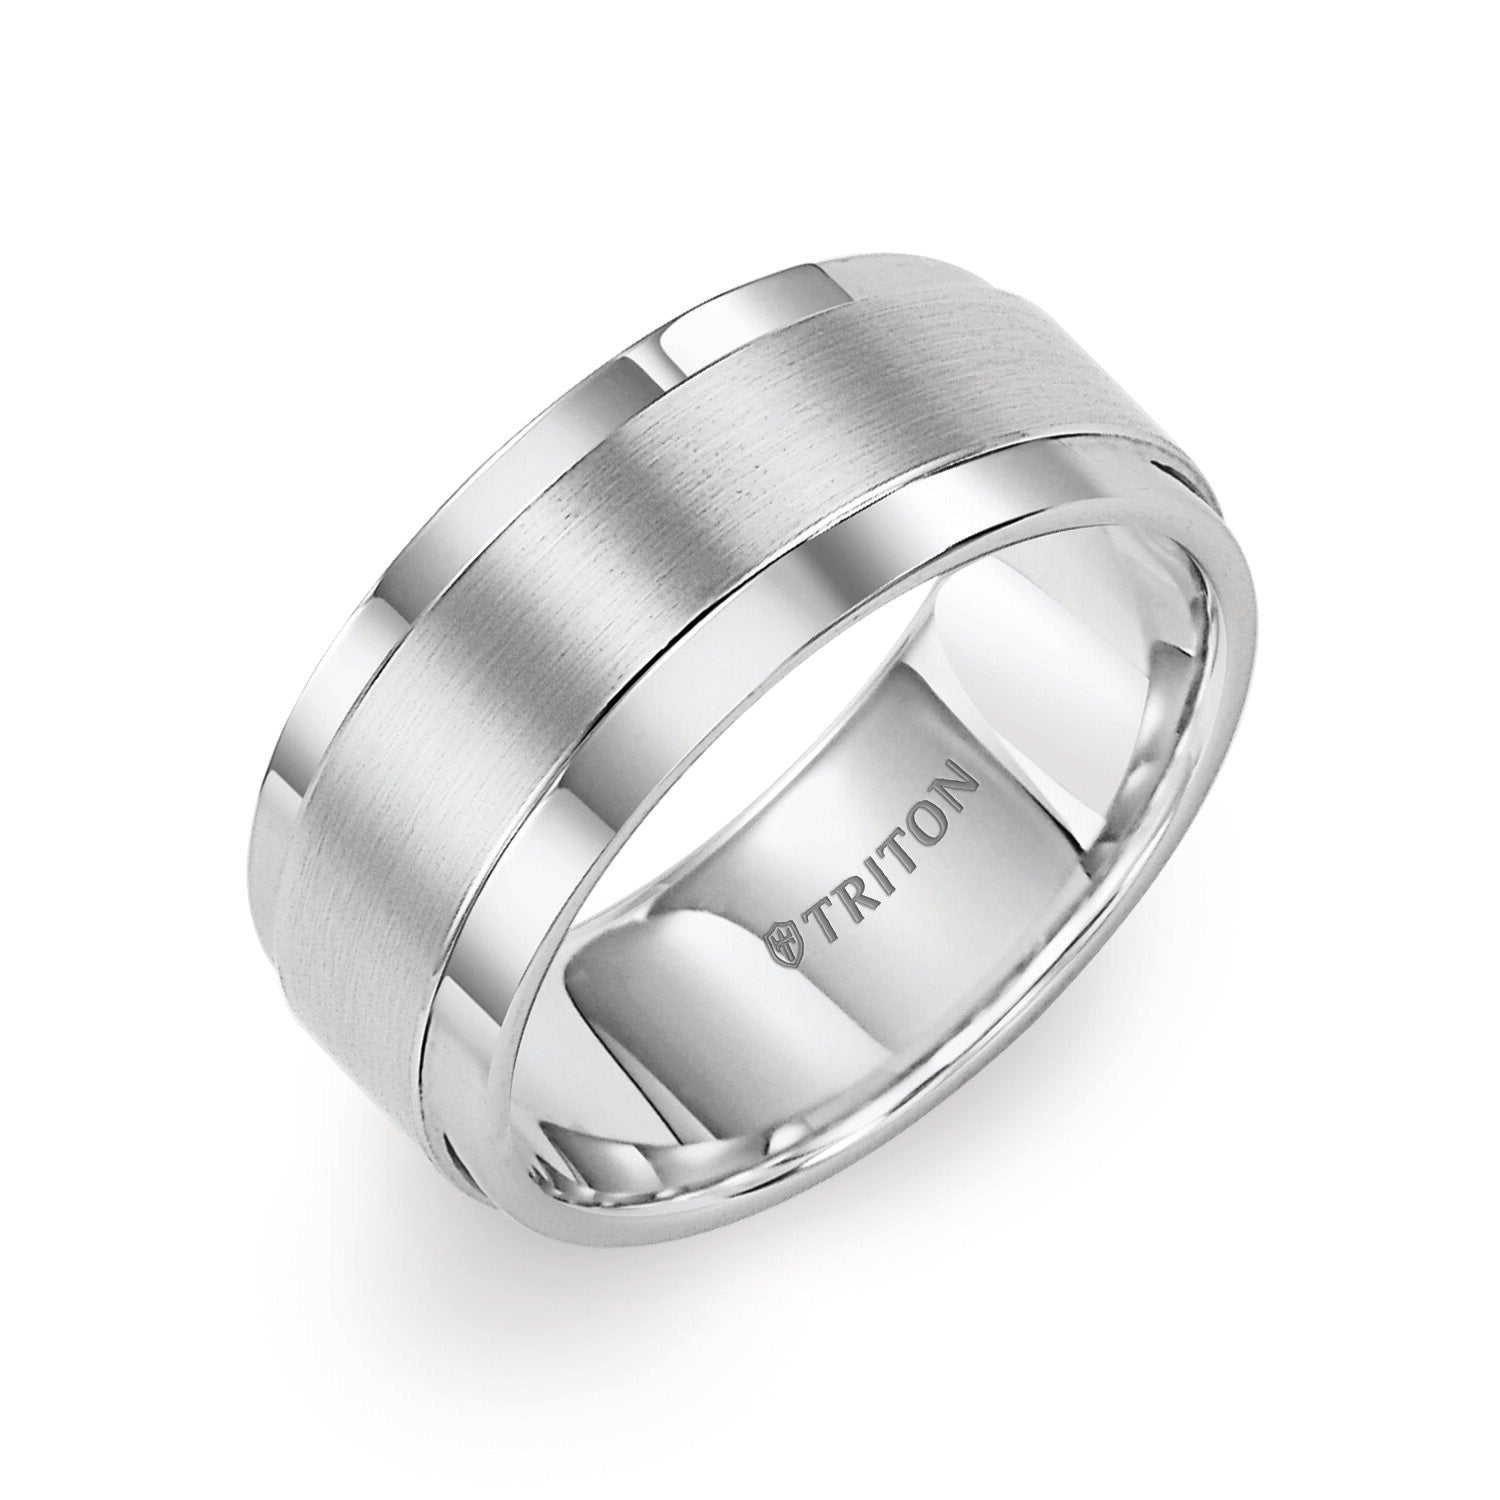 9MM White Tungsten Carbide Ring - Brushed Finish and Step Edge